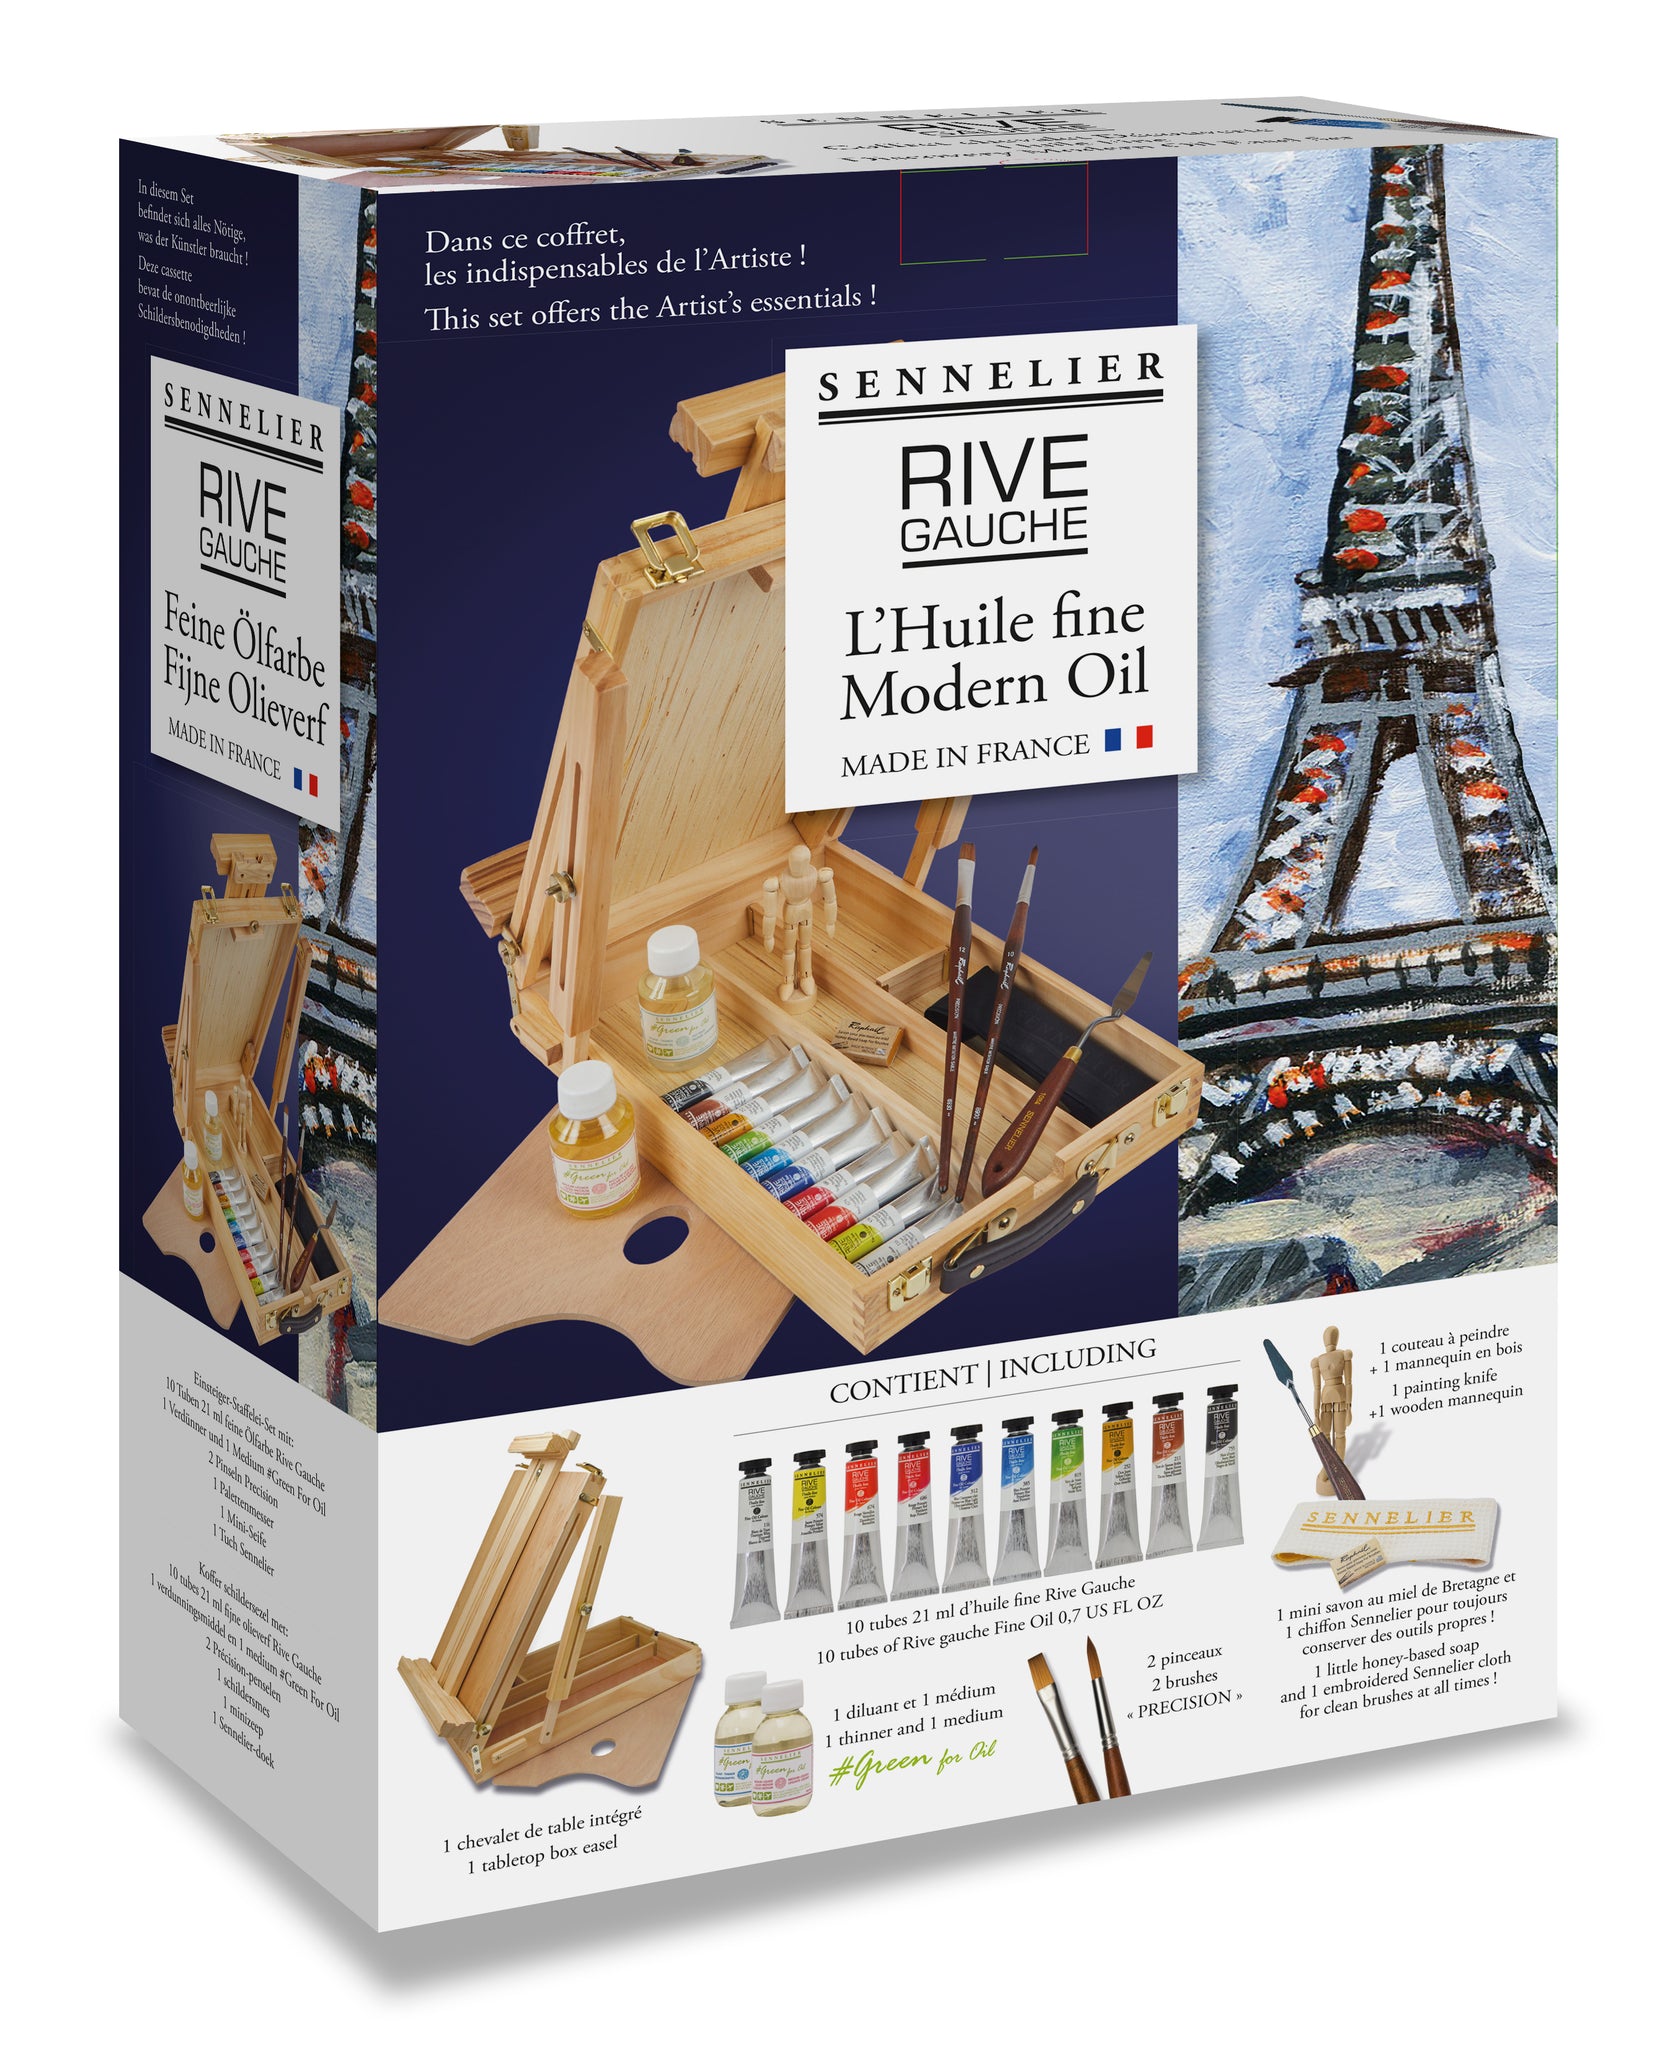 Sennelier Rive Gauche Wooden Box Set of 10x21ml with accessories